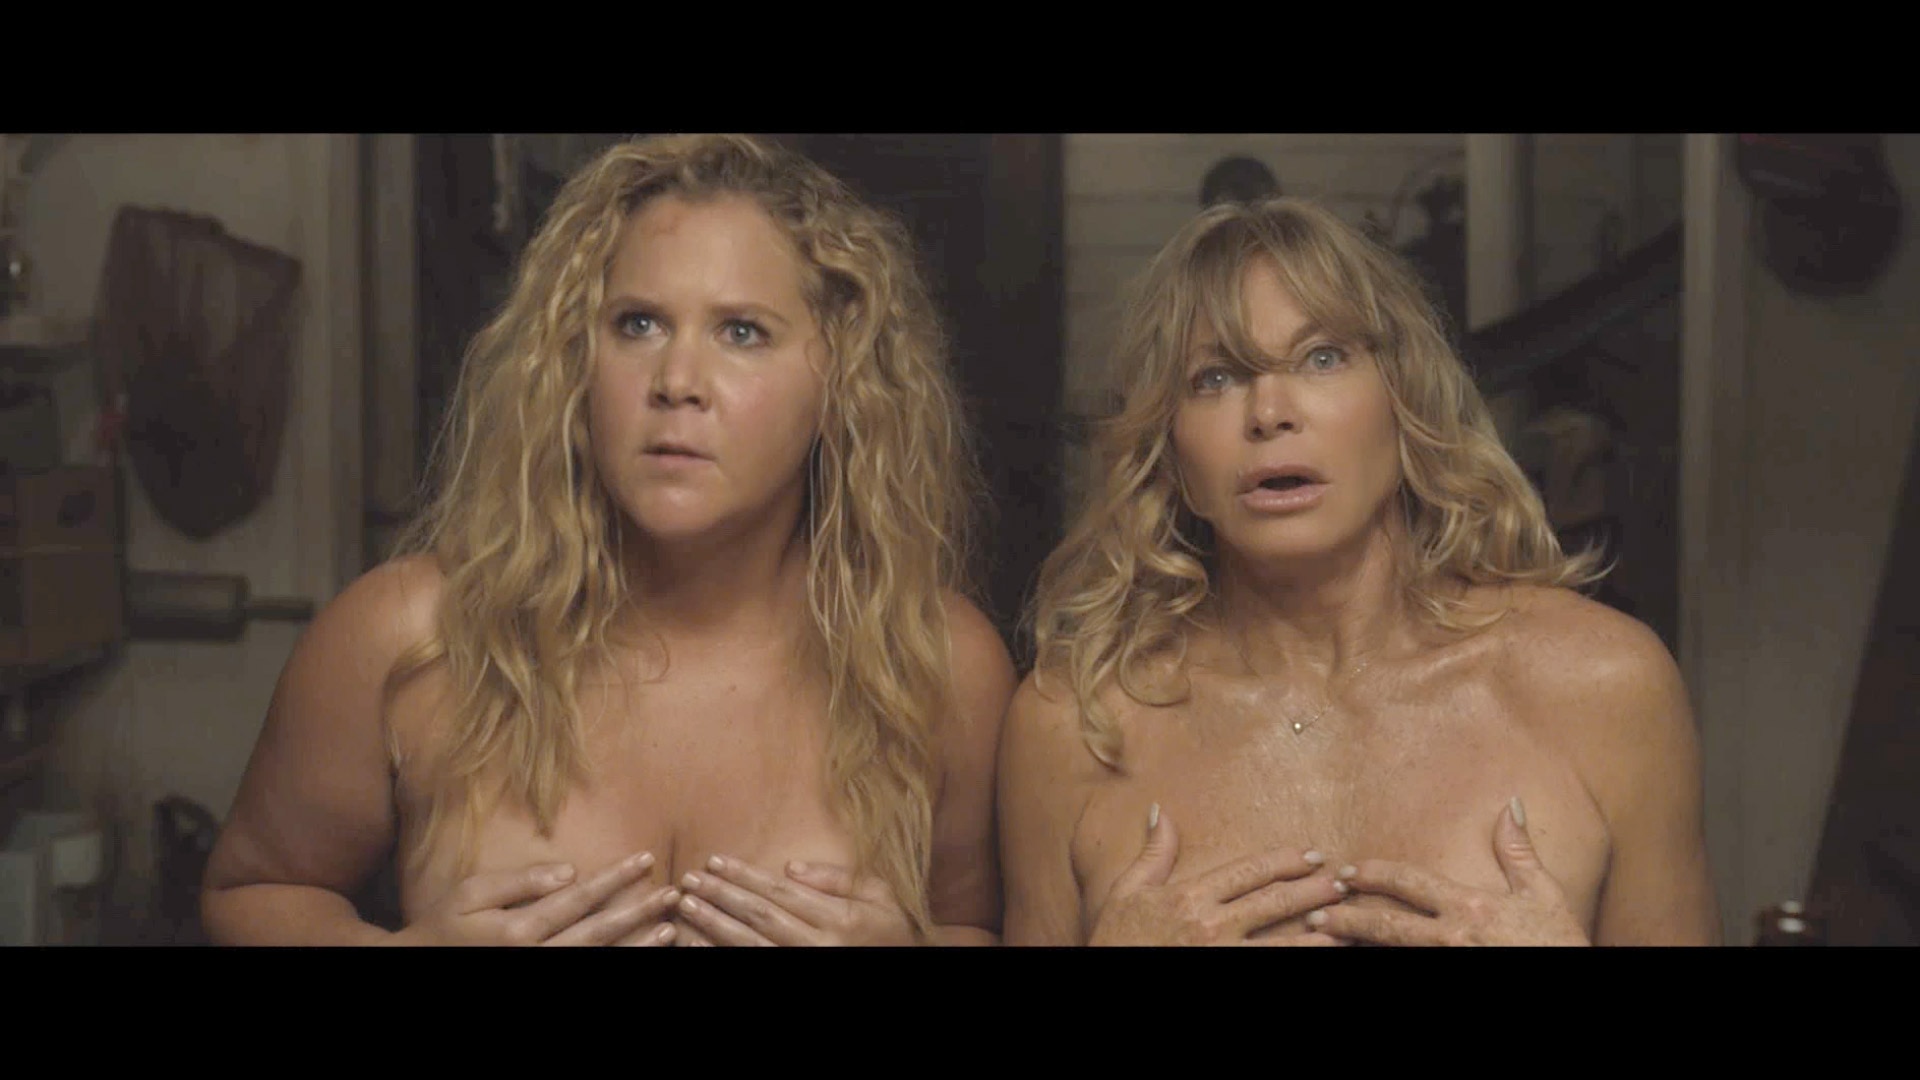 claudius burrows add amy schumer nipple snatched photo